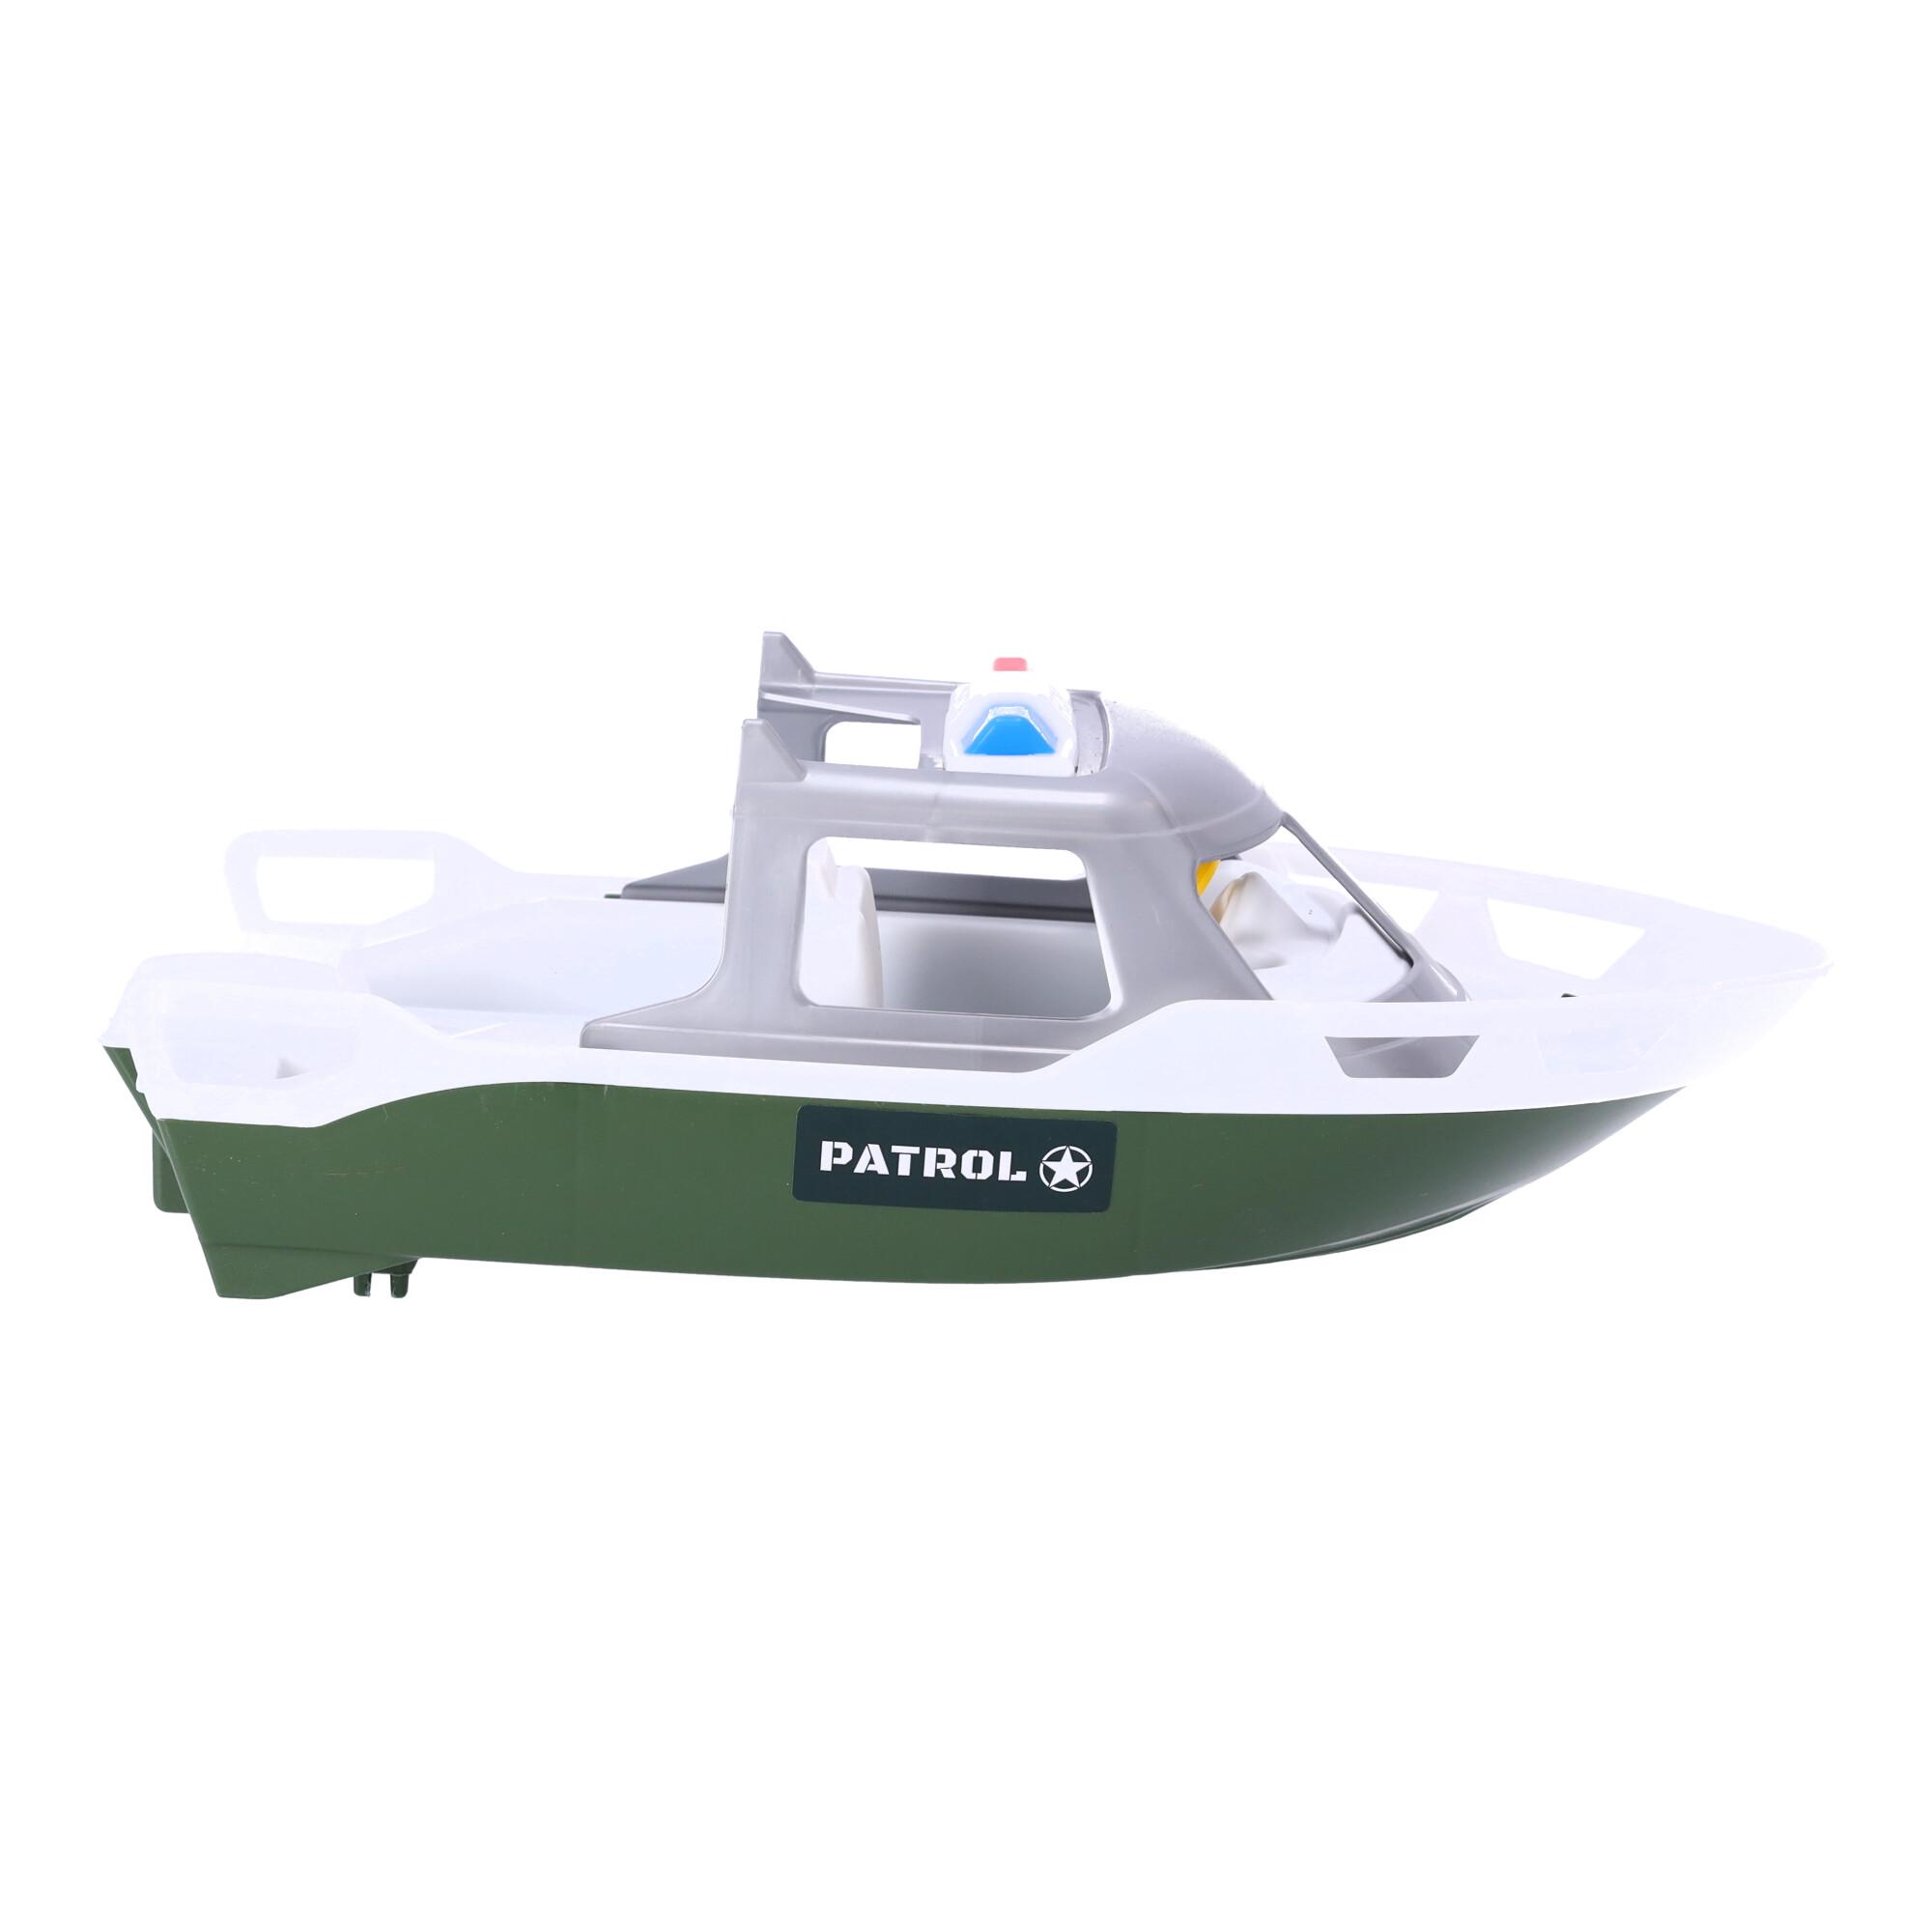 Motorboat Patrol, a toy for children